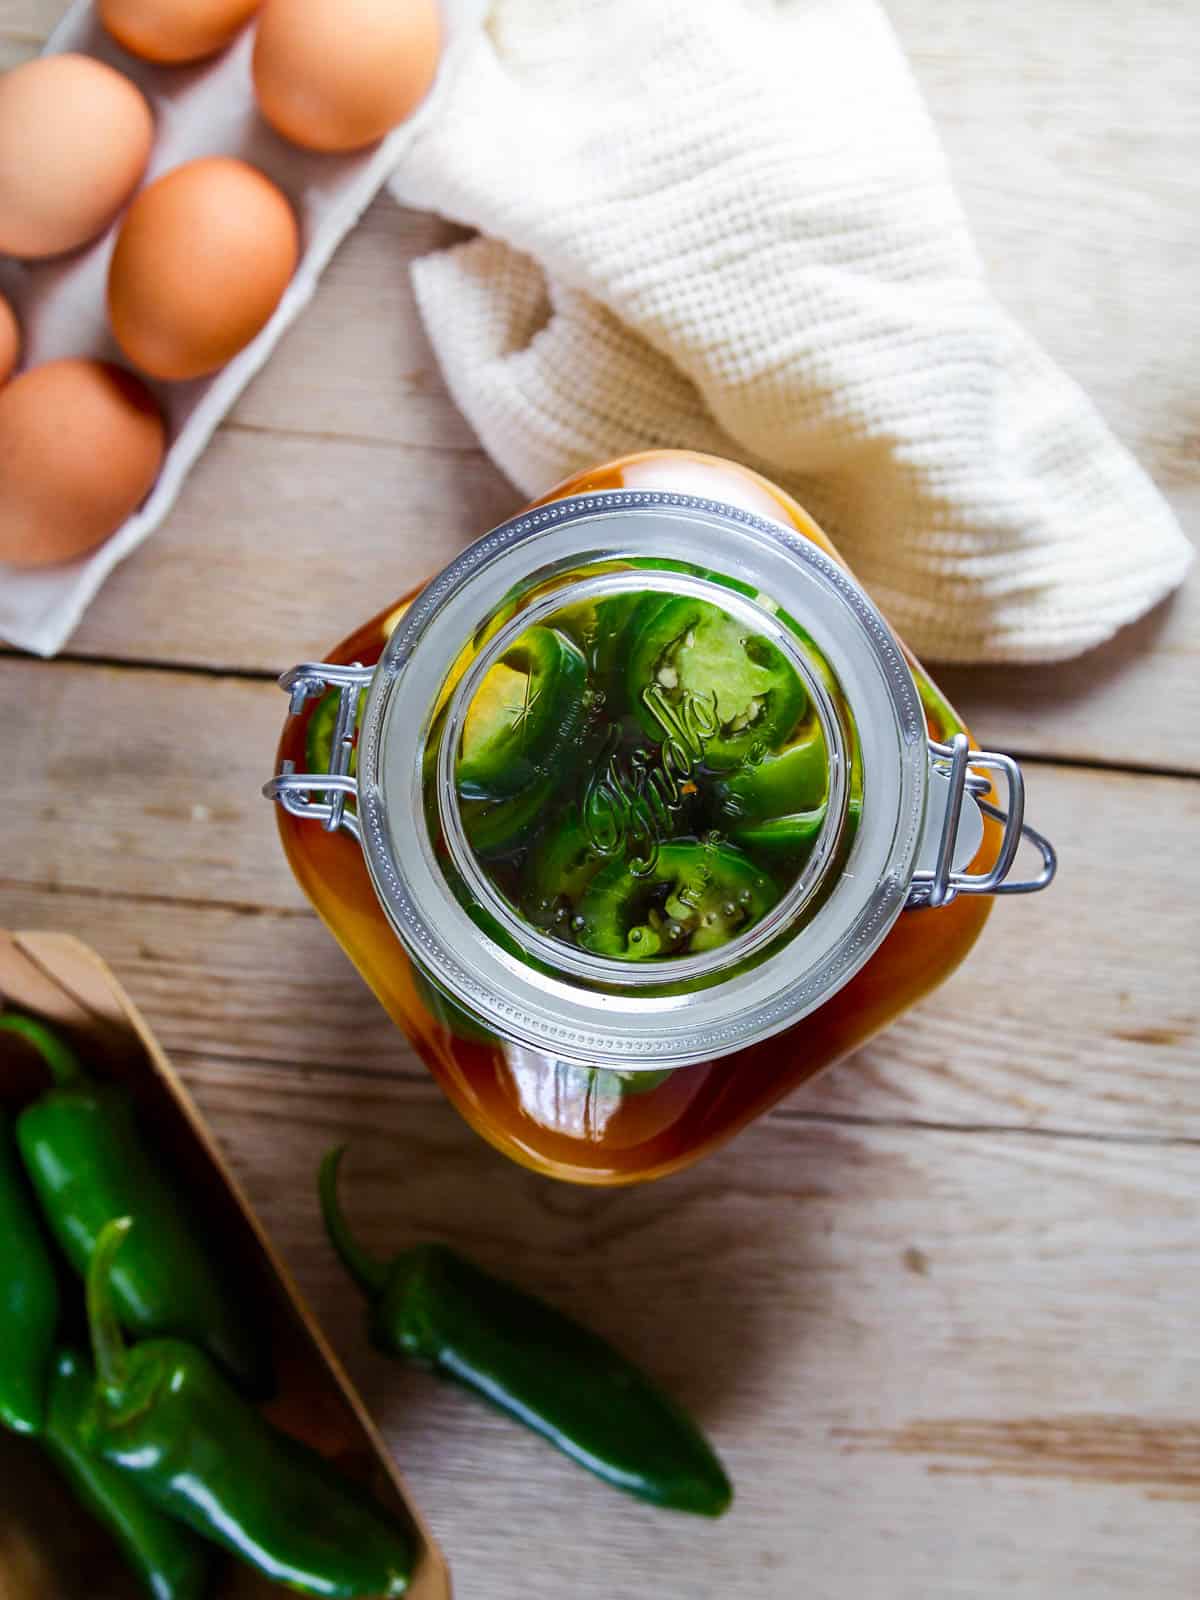 Looking down on a jar of pickled eggs with a carton of eggs and basket of jalapenos.